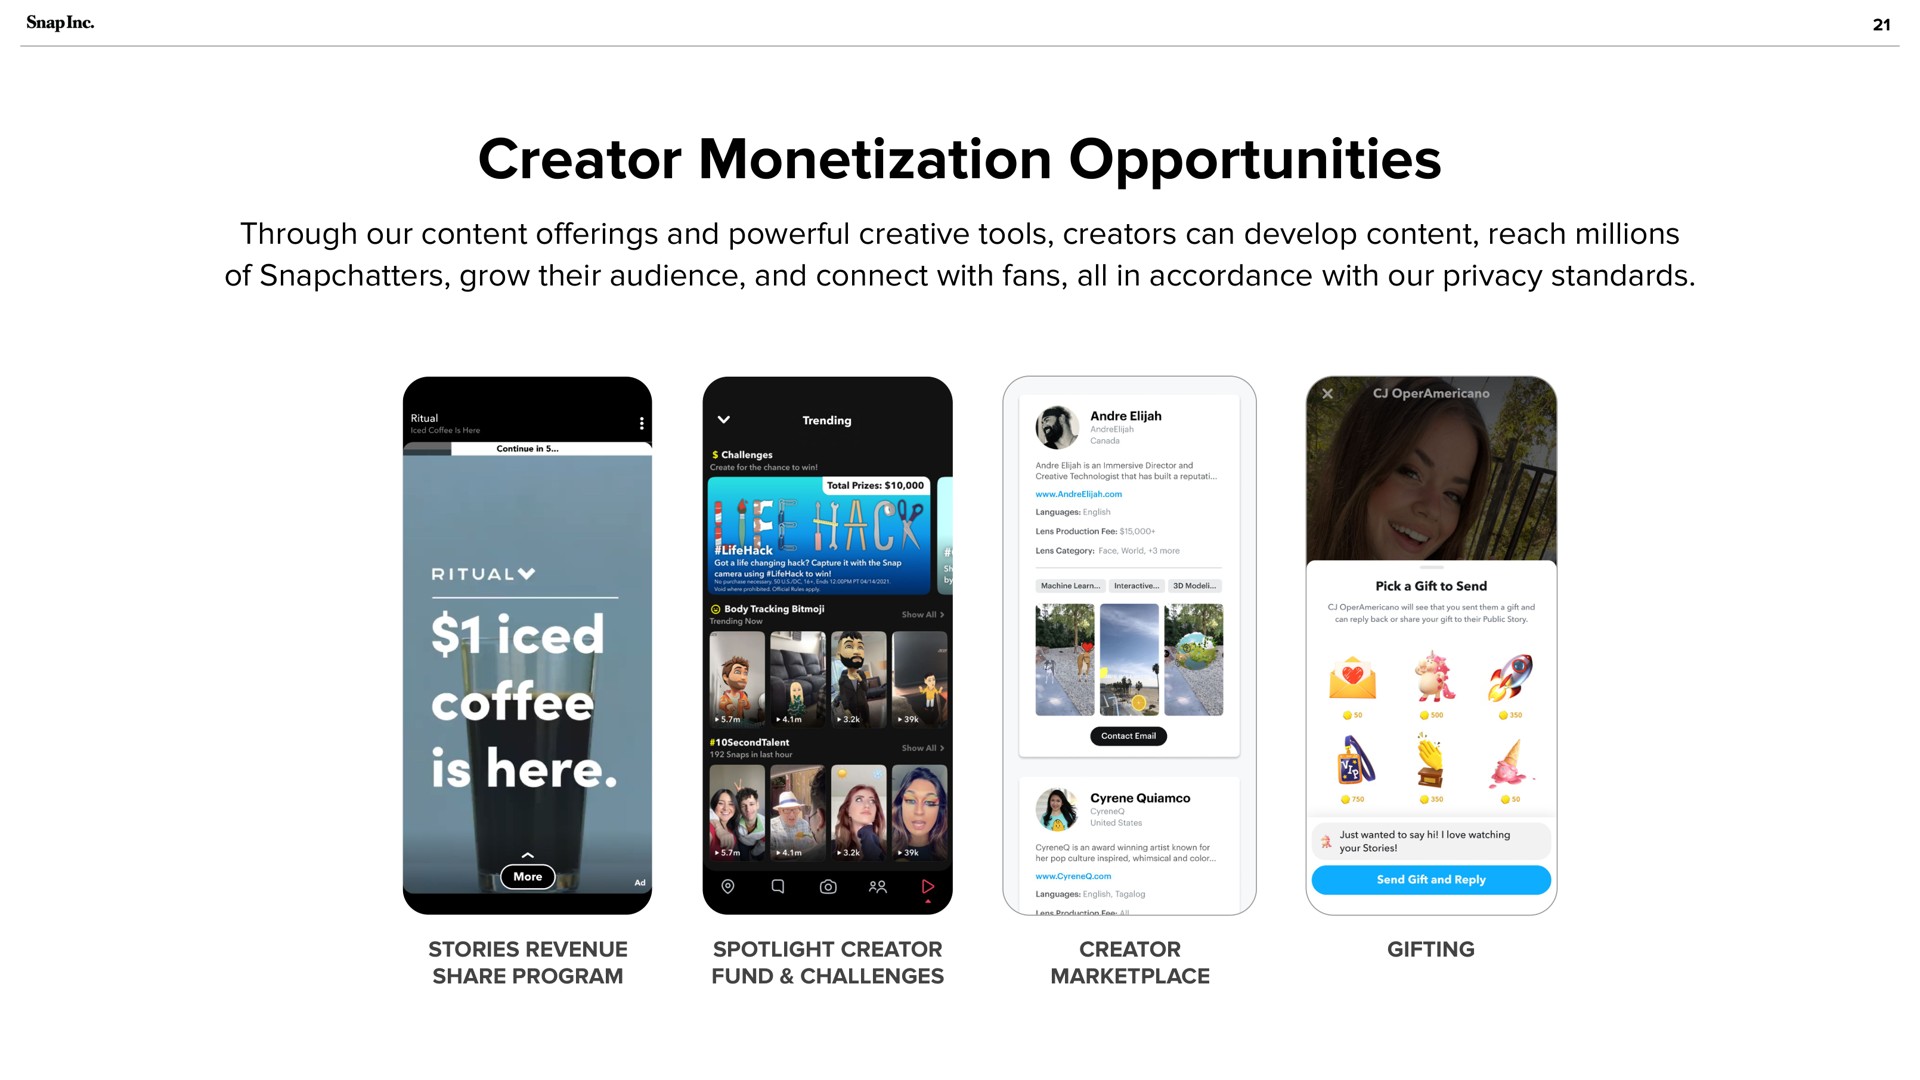 creator monetization opportunities i sliced coffee is here i | Snap Inc